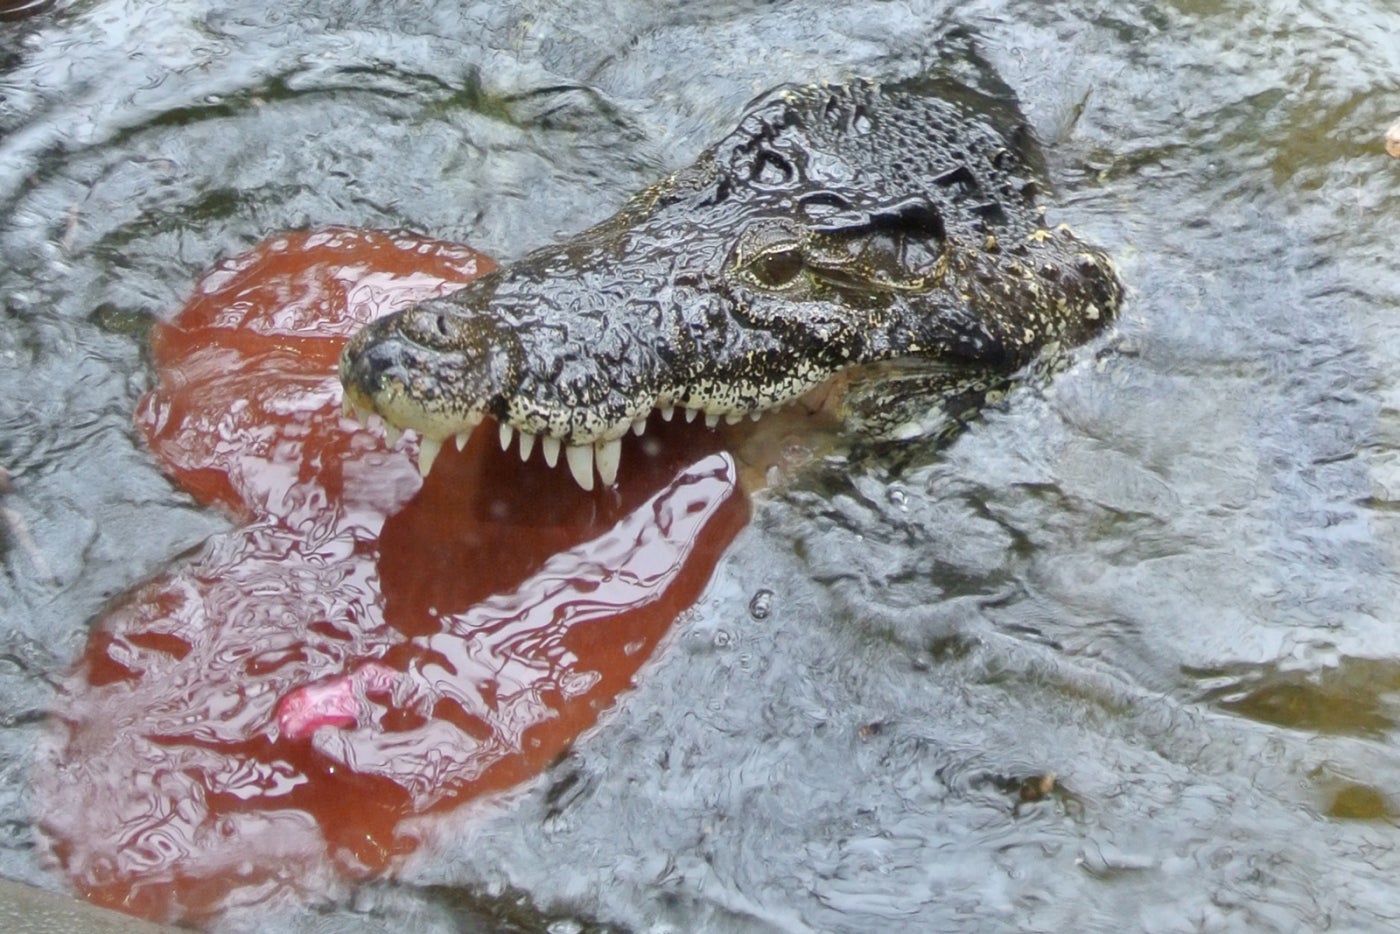 A Cuban crocodile holds a heart-shaped ice cake as part of a Valentine's Day enrichment.